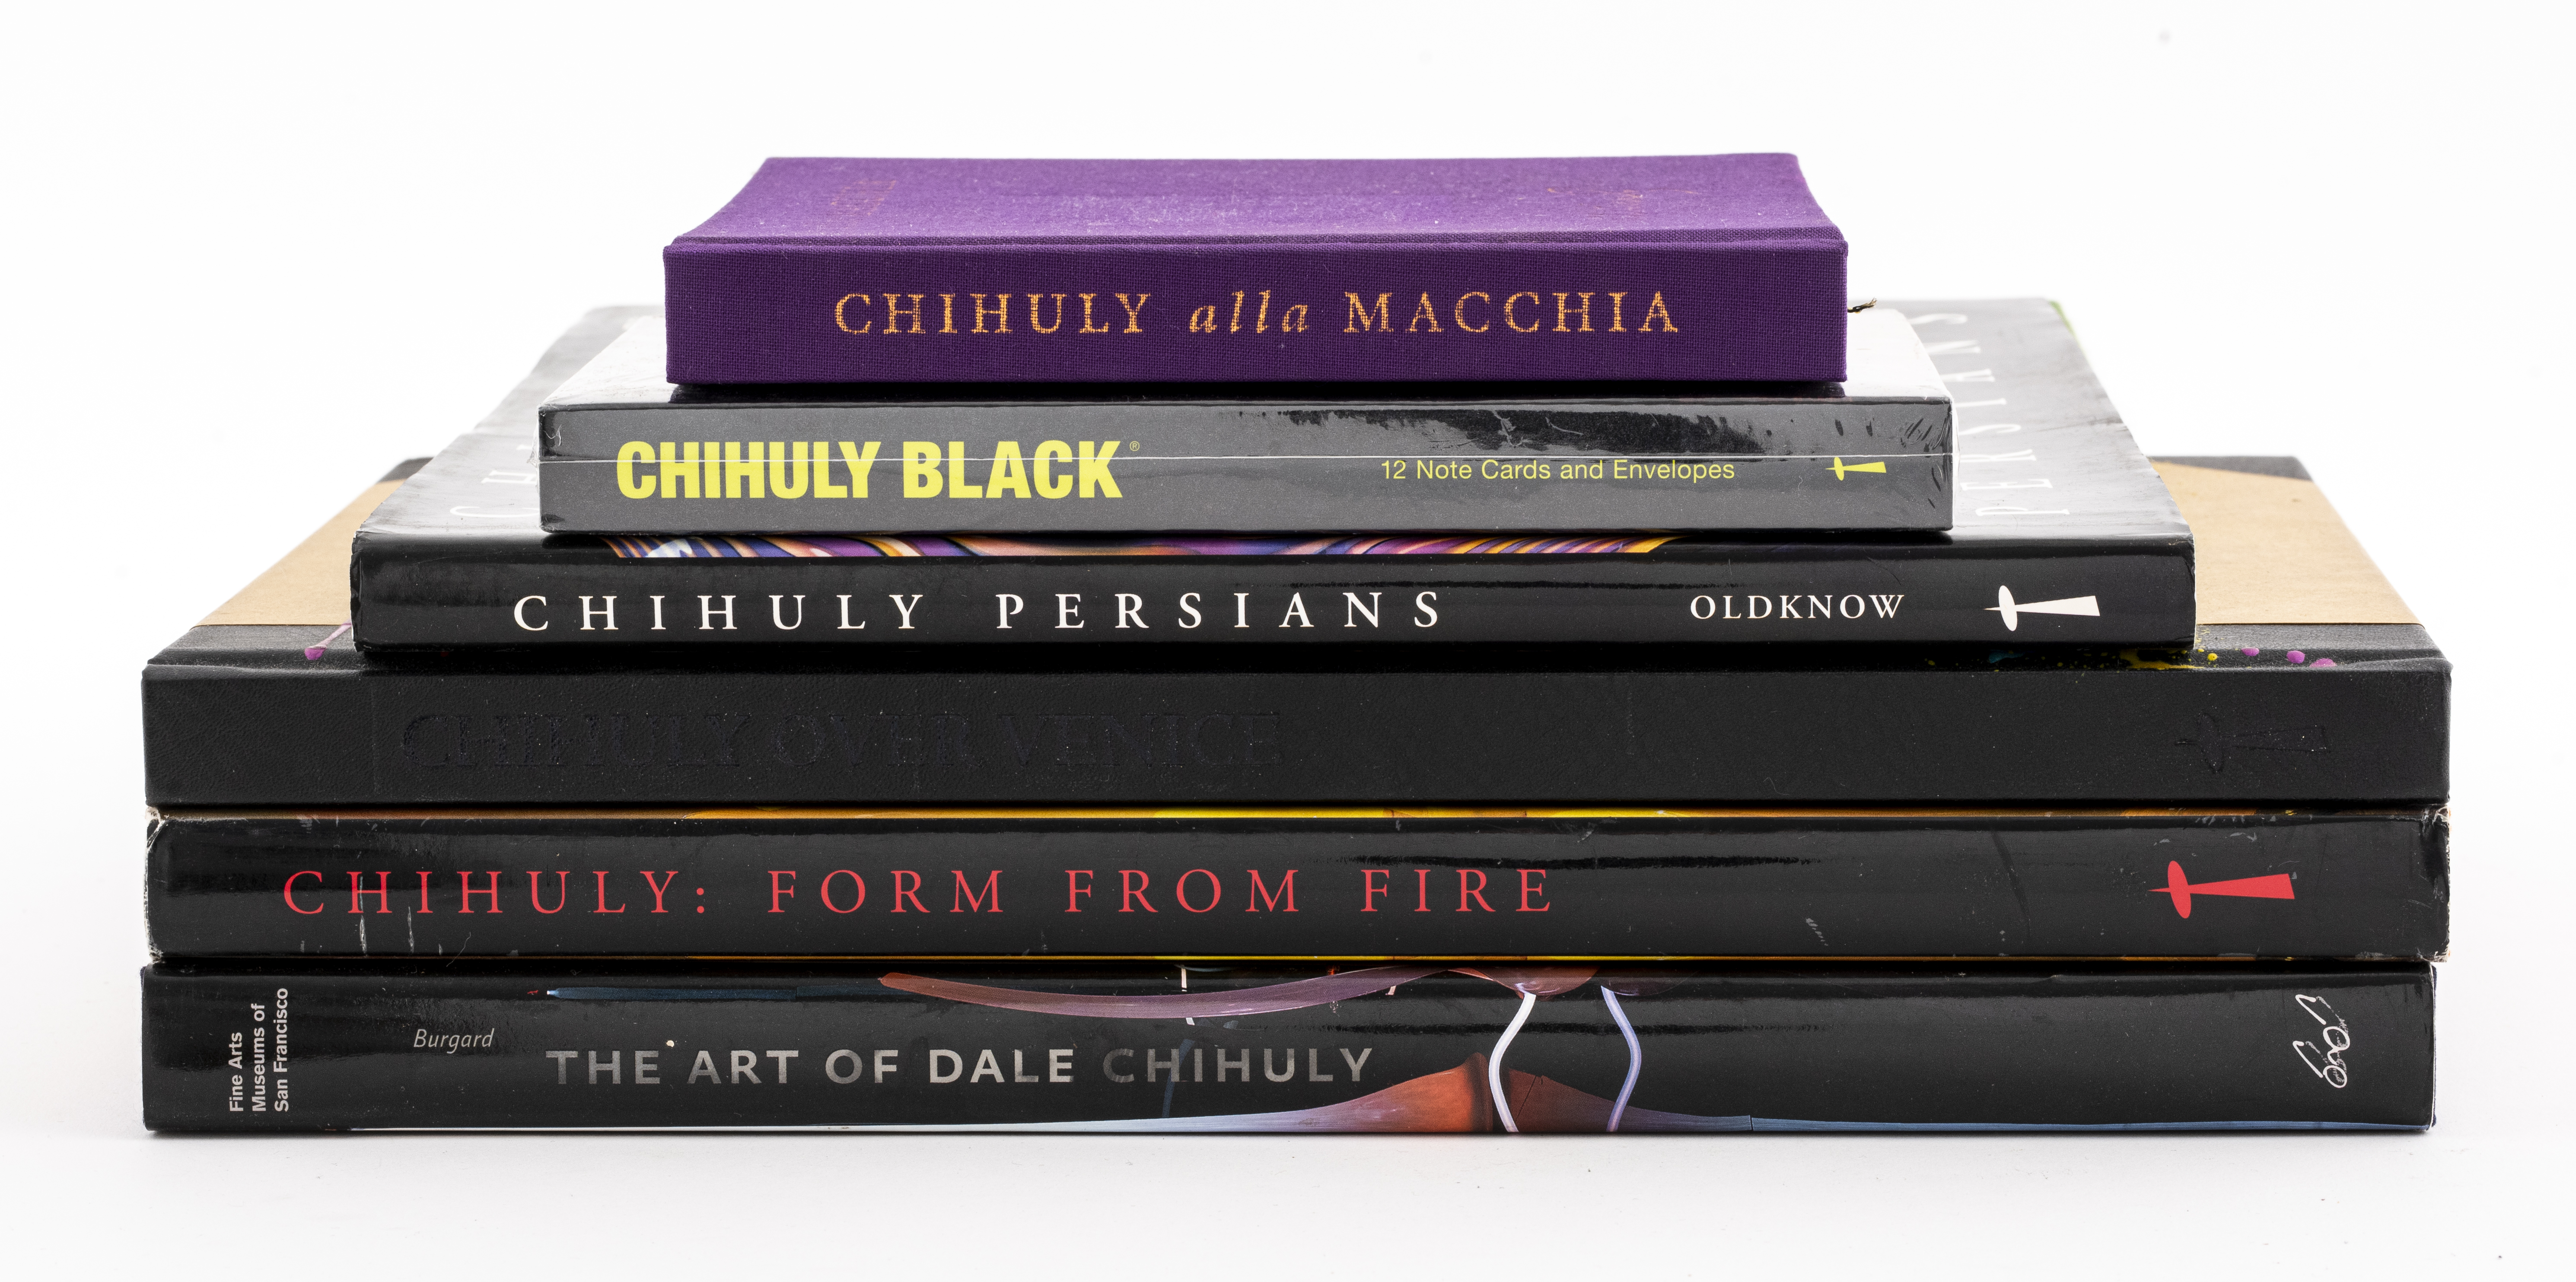 BOOKS ON DALE CHIHULY ART GLASS,